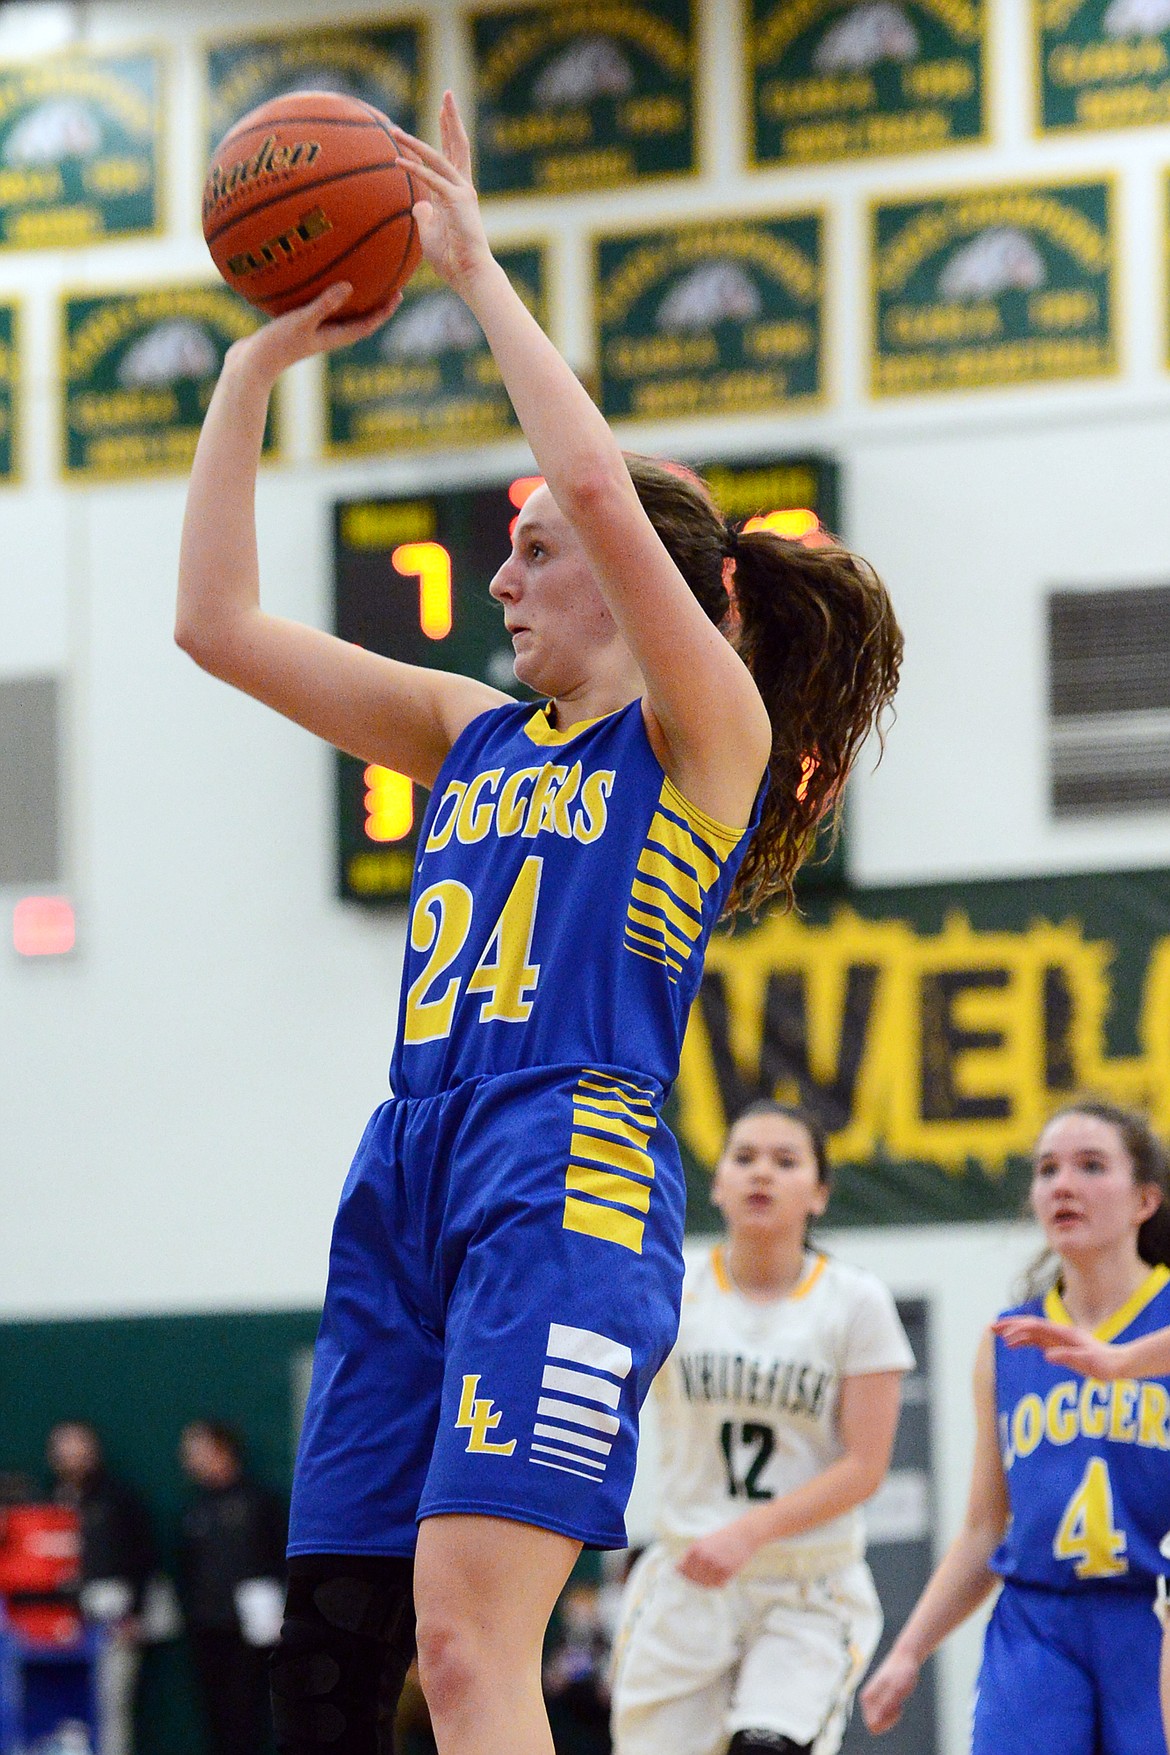 Libby's Jayden Winslow (24) pulls up for a jumper from the elbow against Whitefish at Whitefish High School on Thursday. (Casey Kreider/Daily Inter Lake)